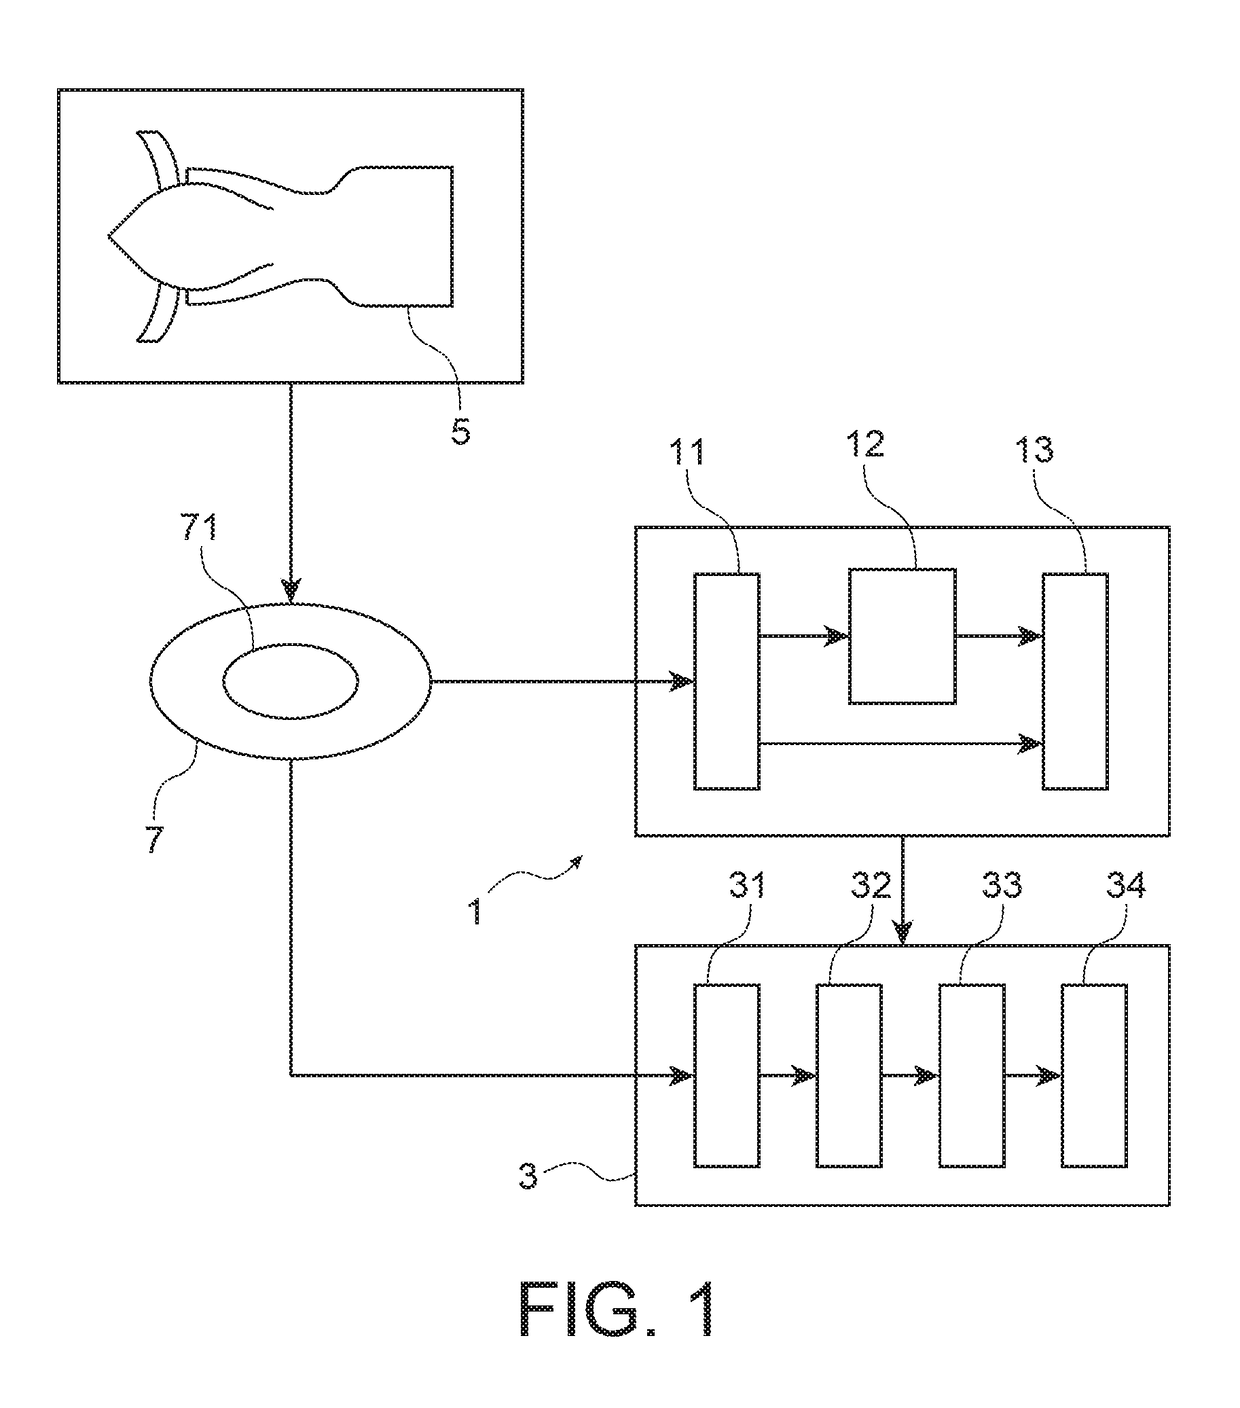 Validation tool for an aircraft engine monitoring system